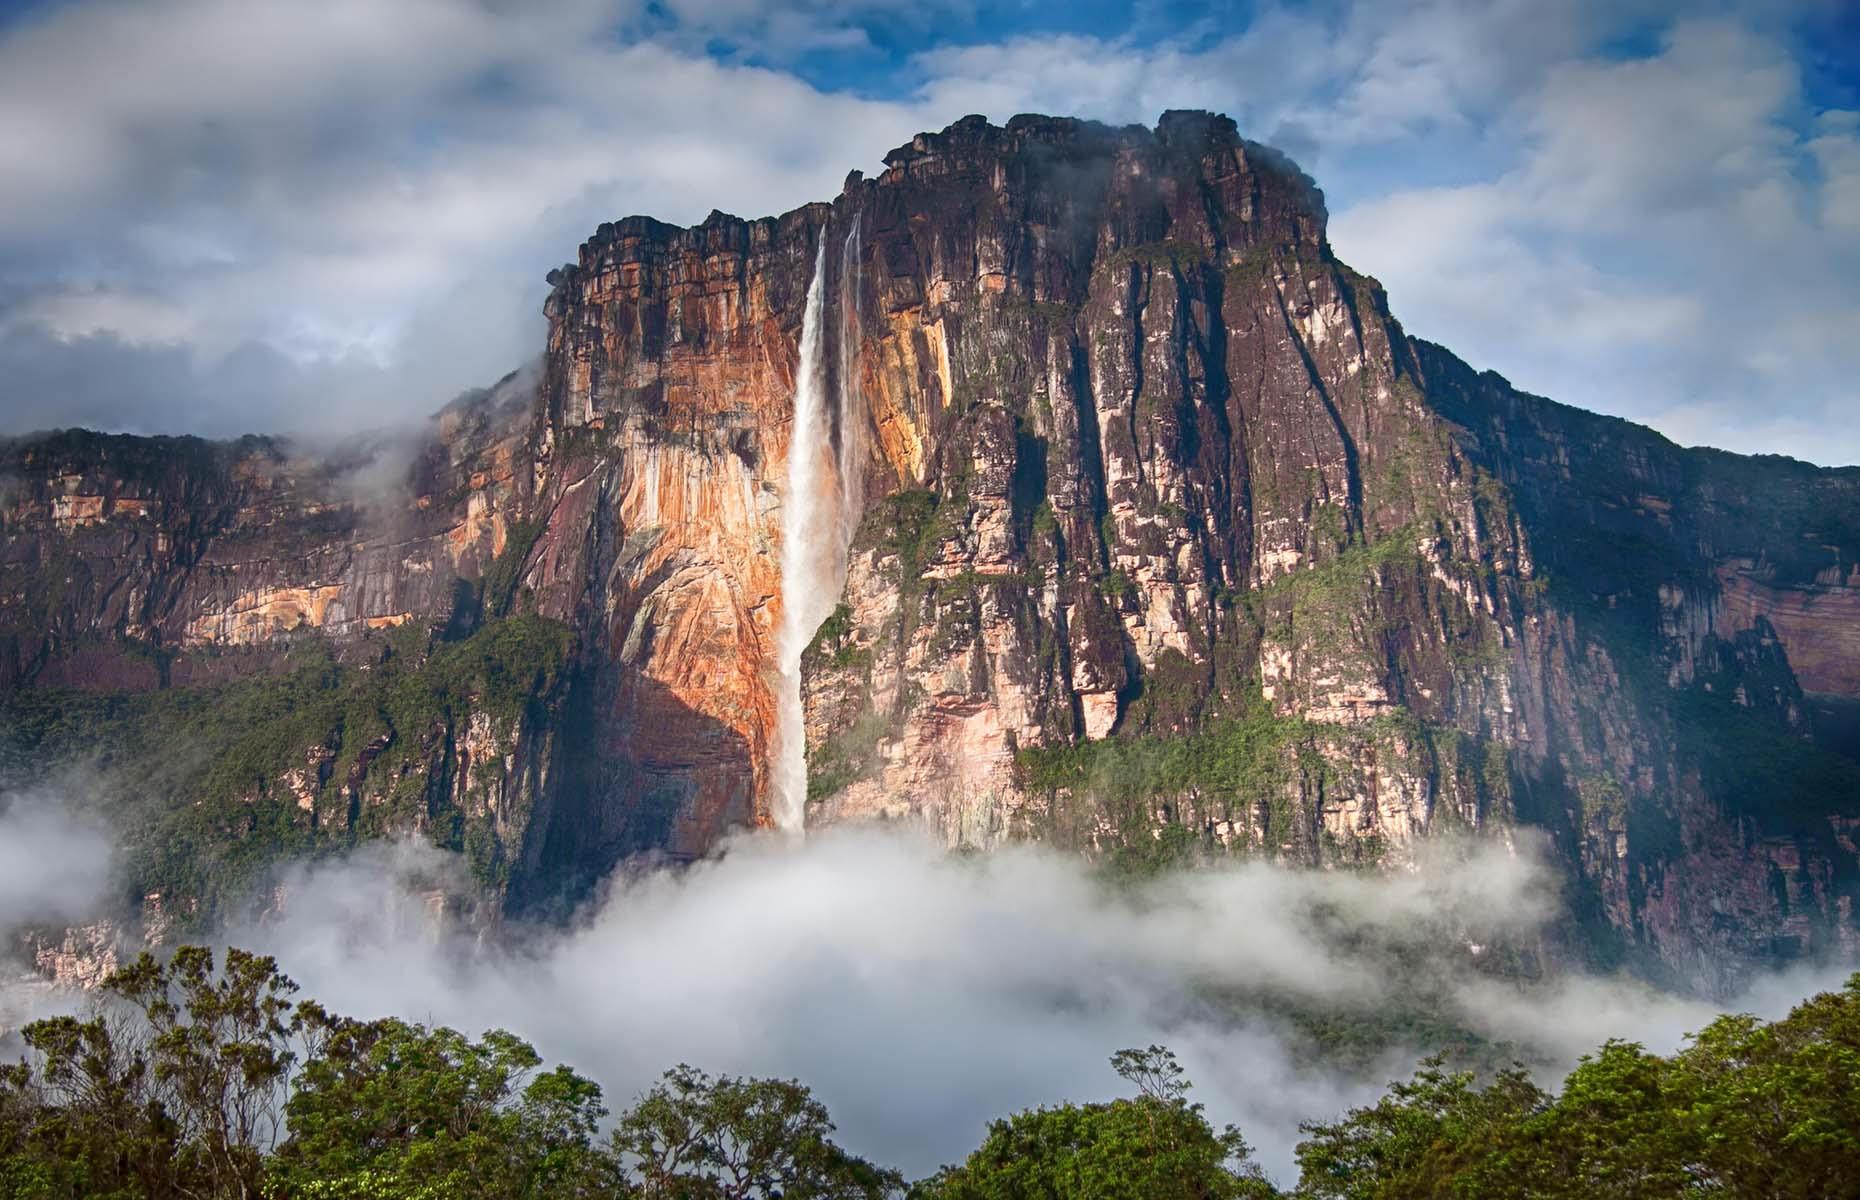 Located in the Guiana Highlands of Venezuela, this mammoth waterfall is dramatic and arresting in equal measure. The drop is more than 3,199 feet (975m), making Angel Falls the world's highest uninterrupted waterfall. It cascades over the edge of the Auyán-Tepuí mountain, a designated UNESCO World Heritage Site. Majestic and dominating, this natural wonder highlights the immense power of Mother Nature.